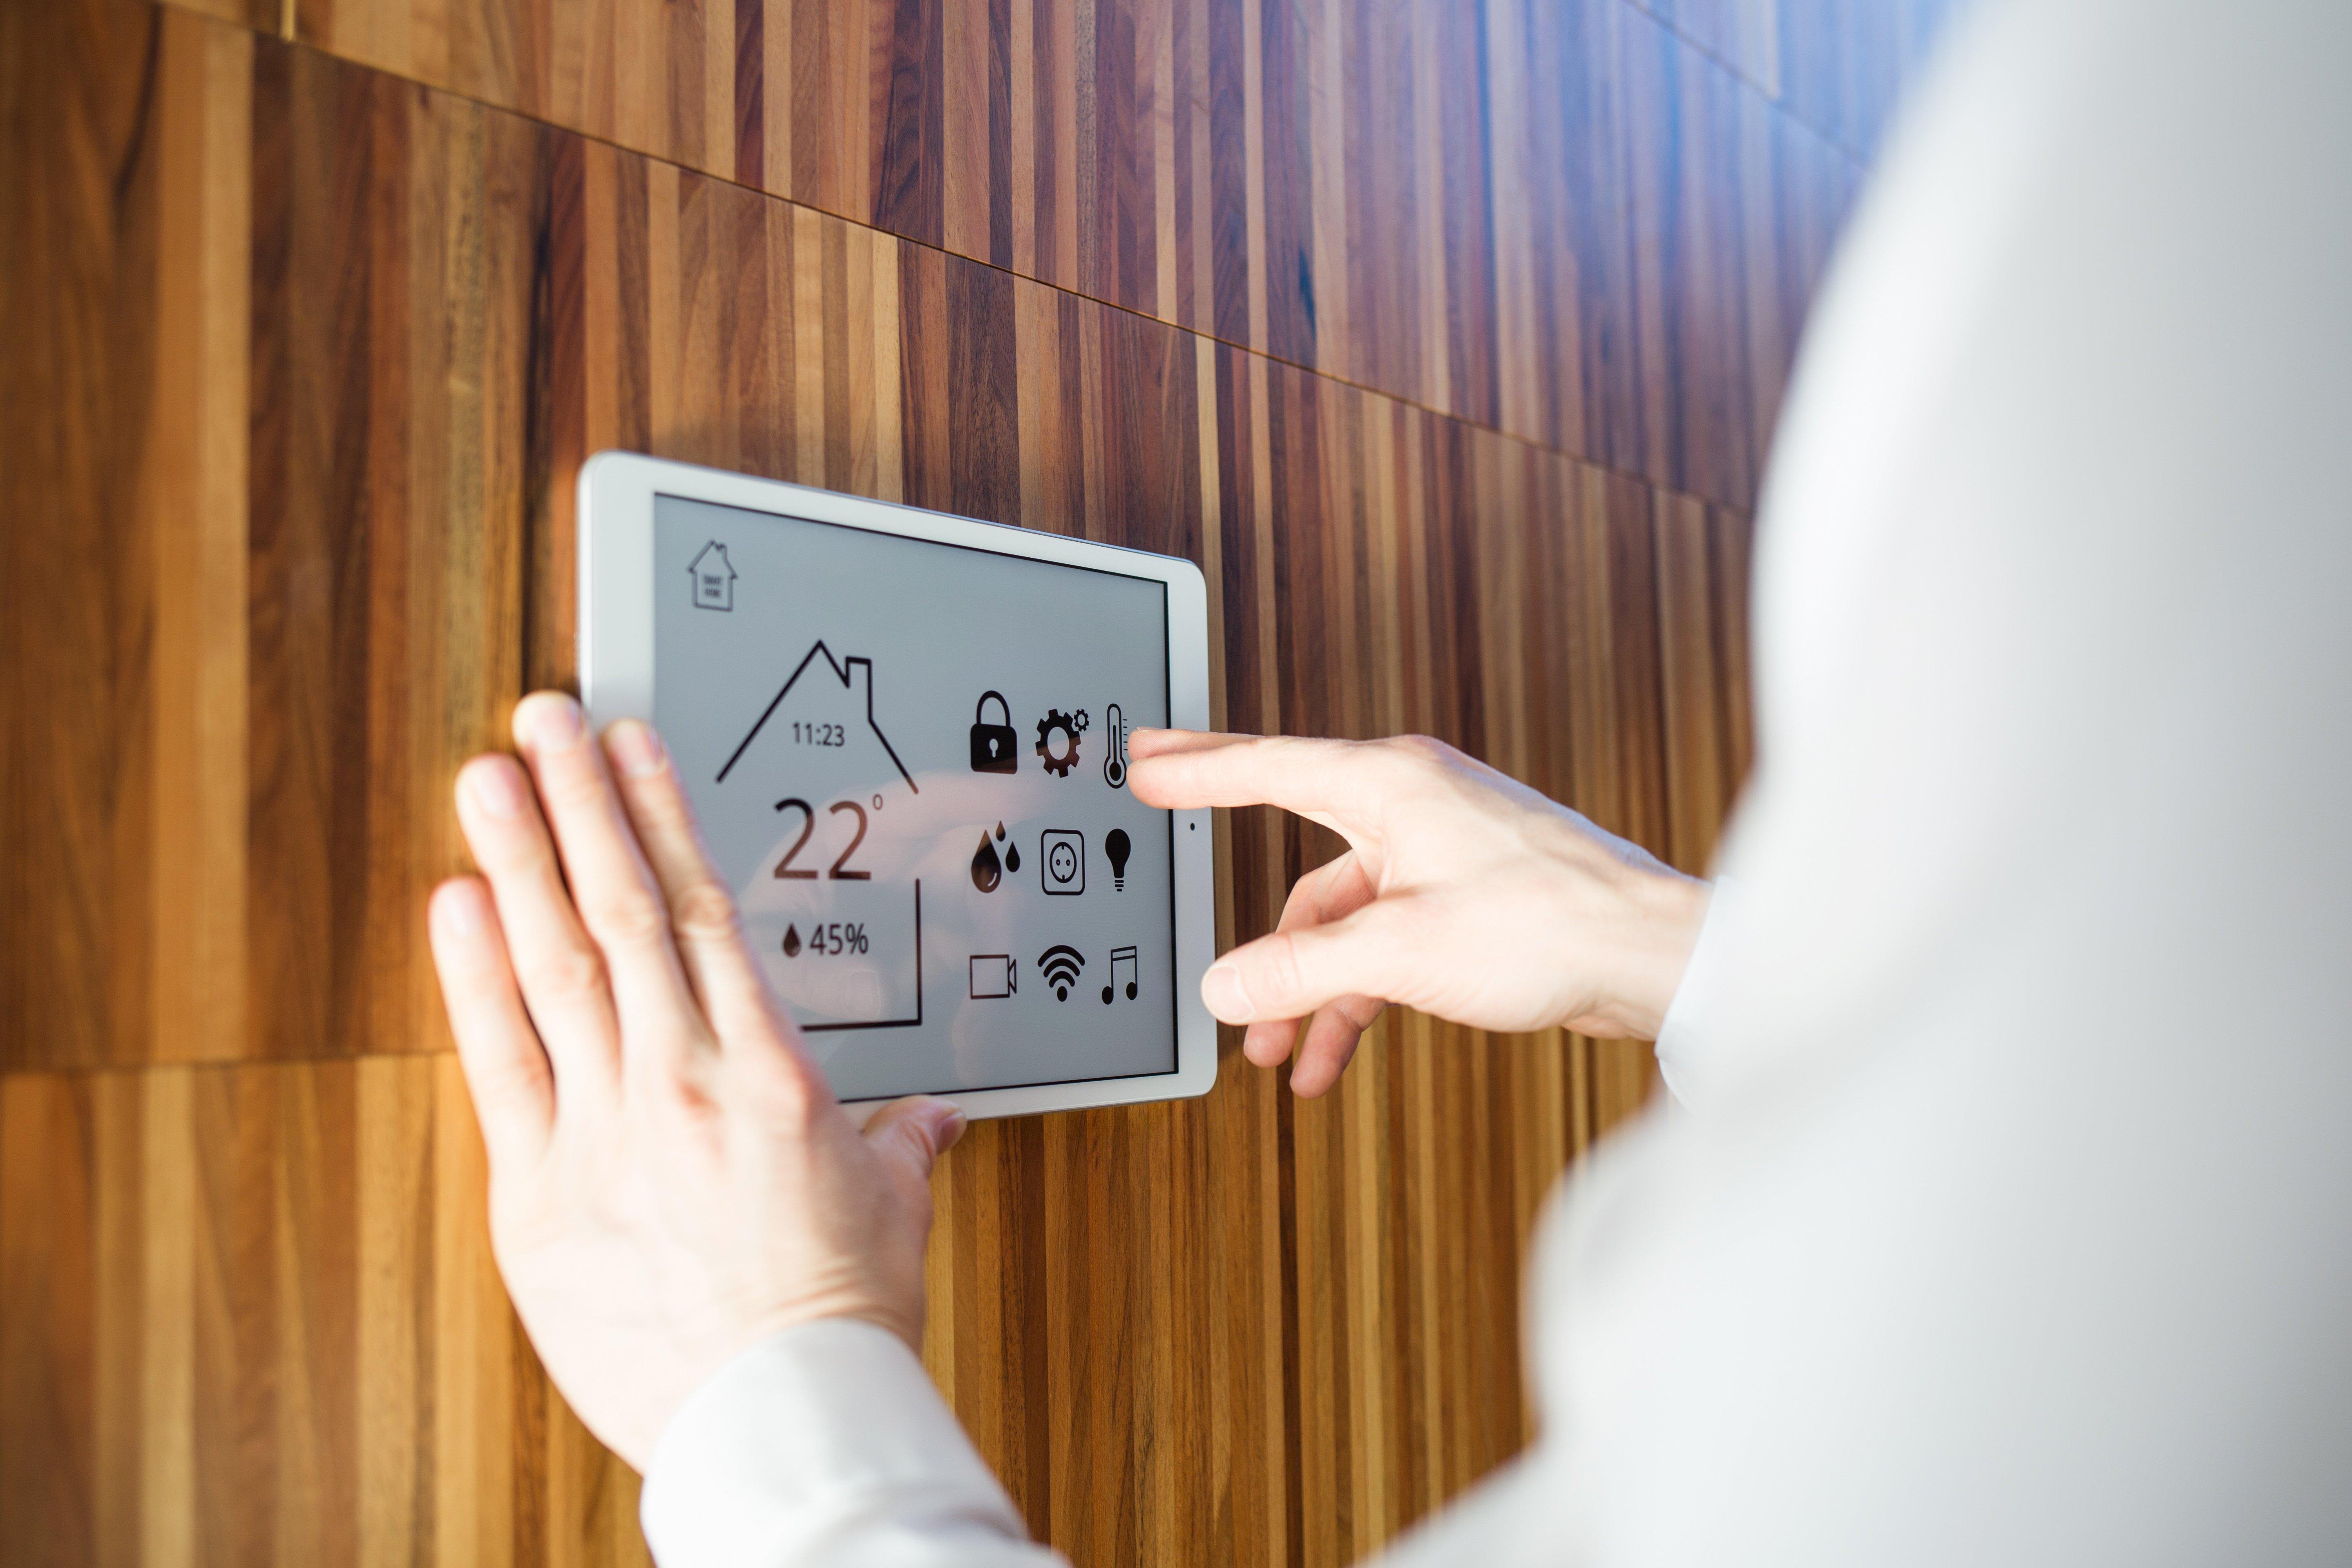 A man controls smart home devices using a digital tablet against a wooden wall.